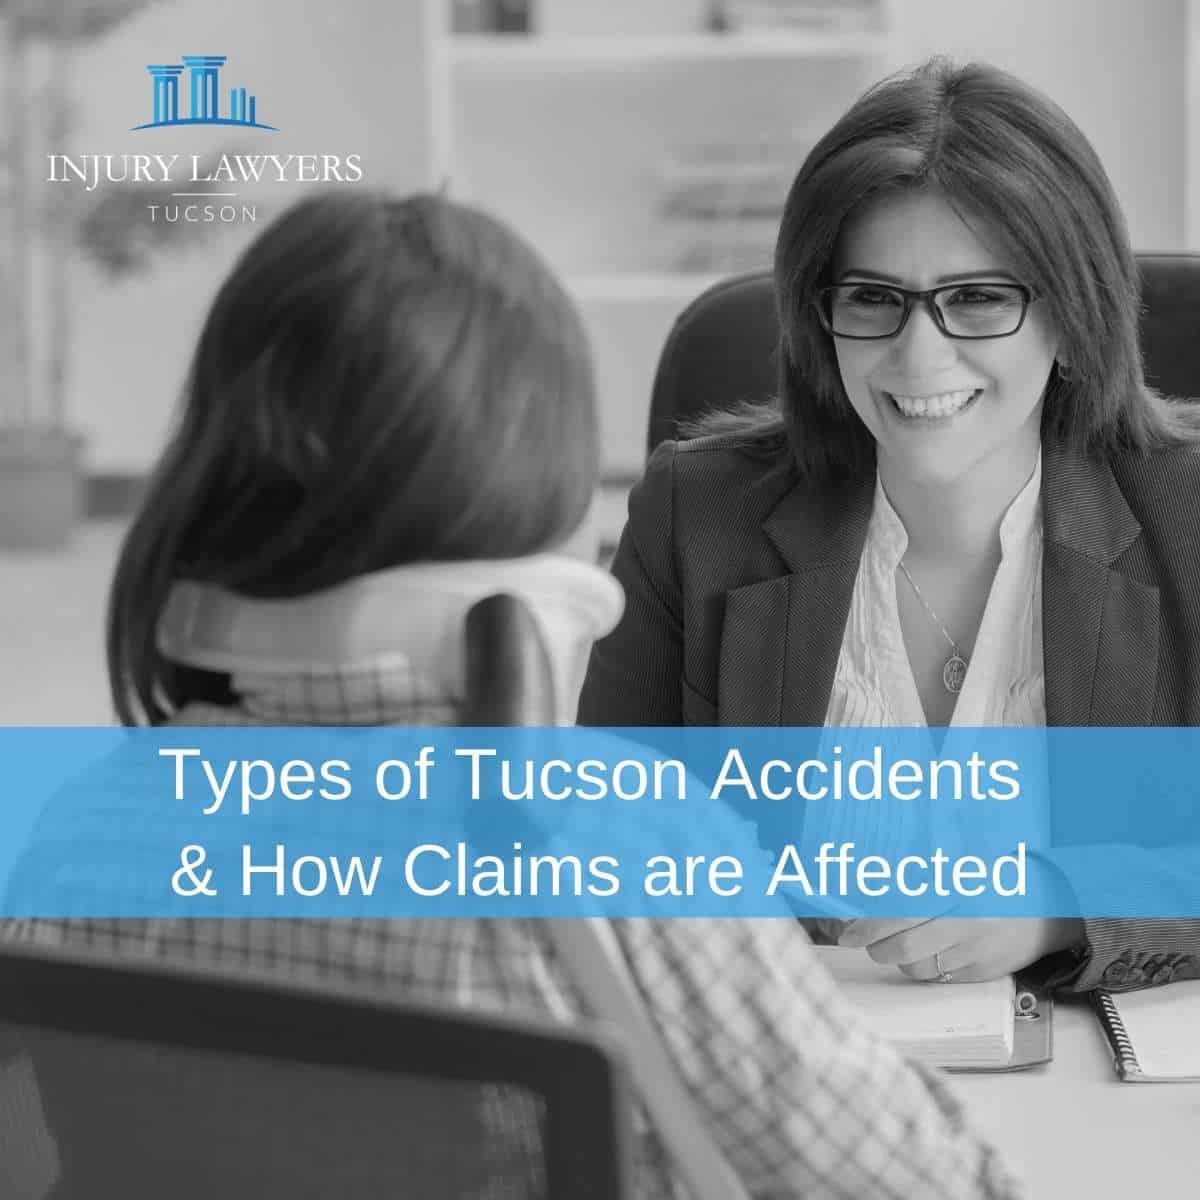 Types of Tucson Accidents & How Claims are Affected